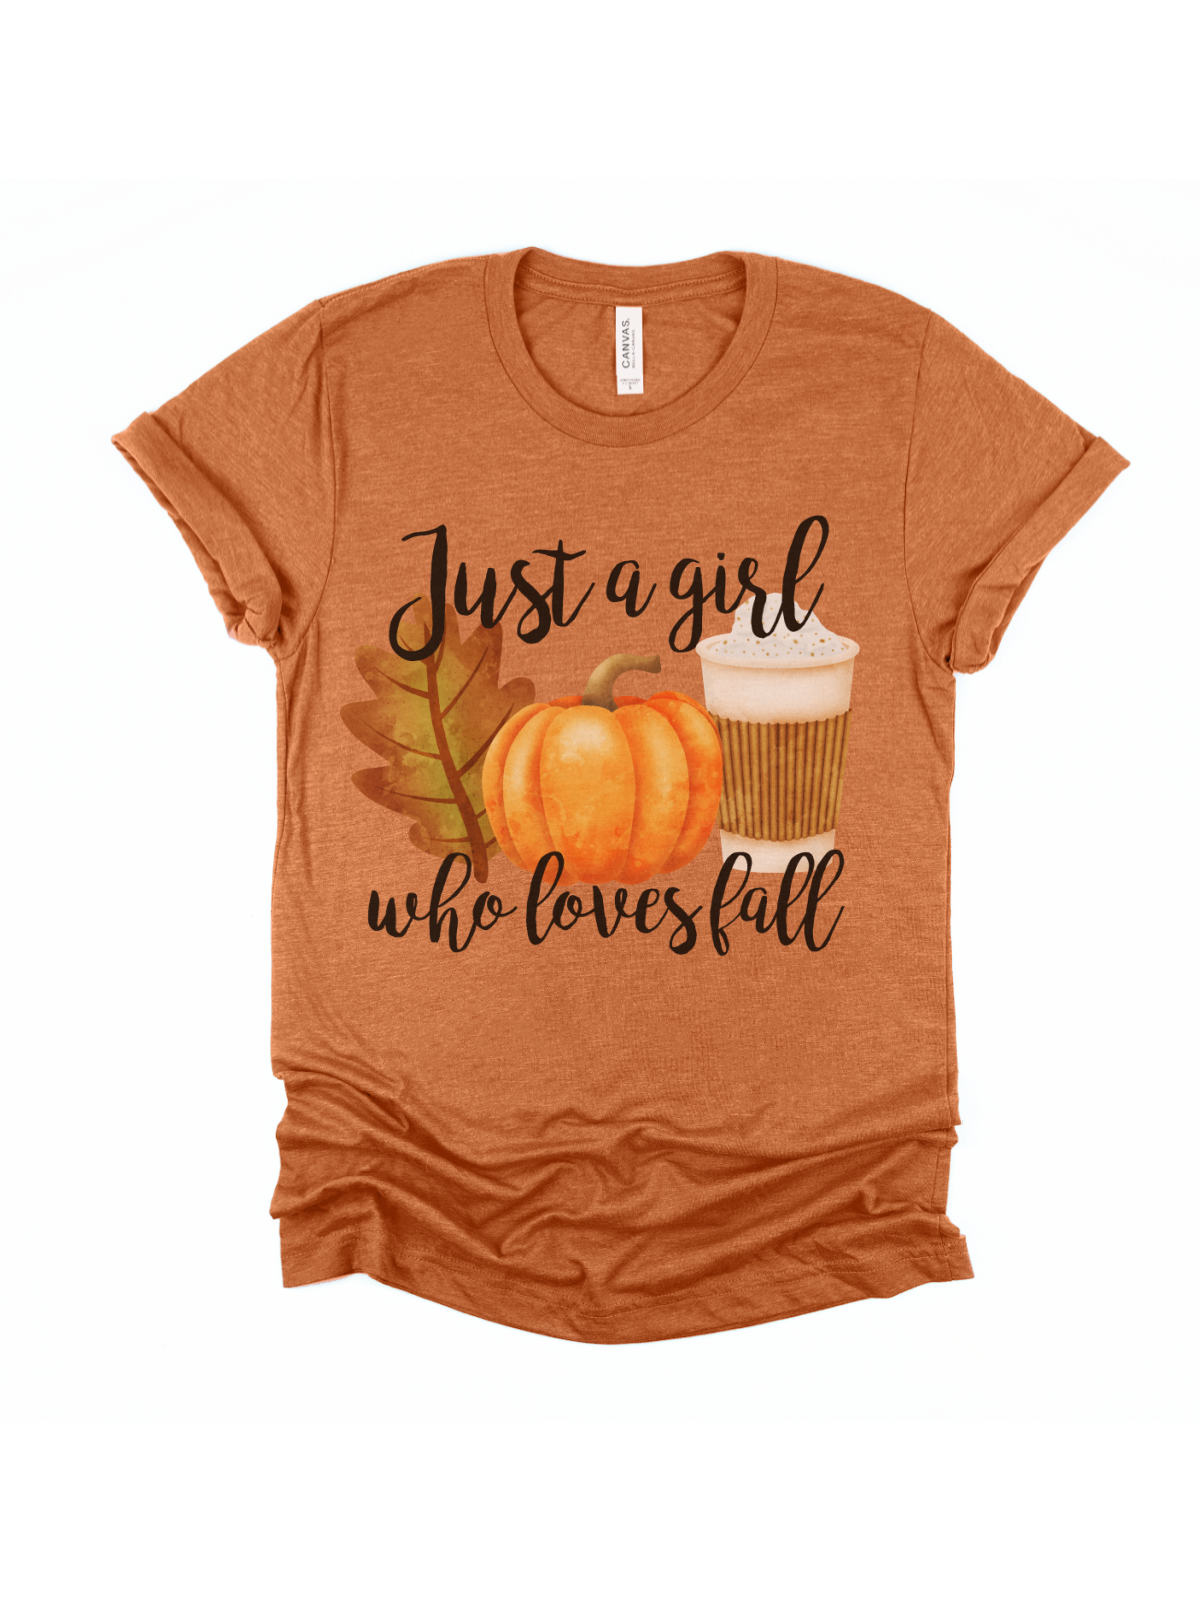 Just a girl who loves fall womans shirt in burnt orange